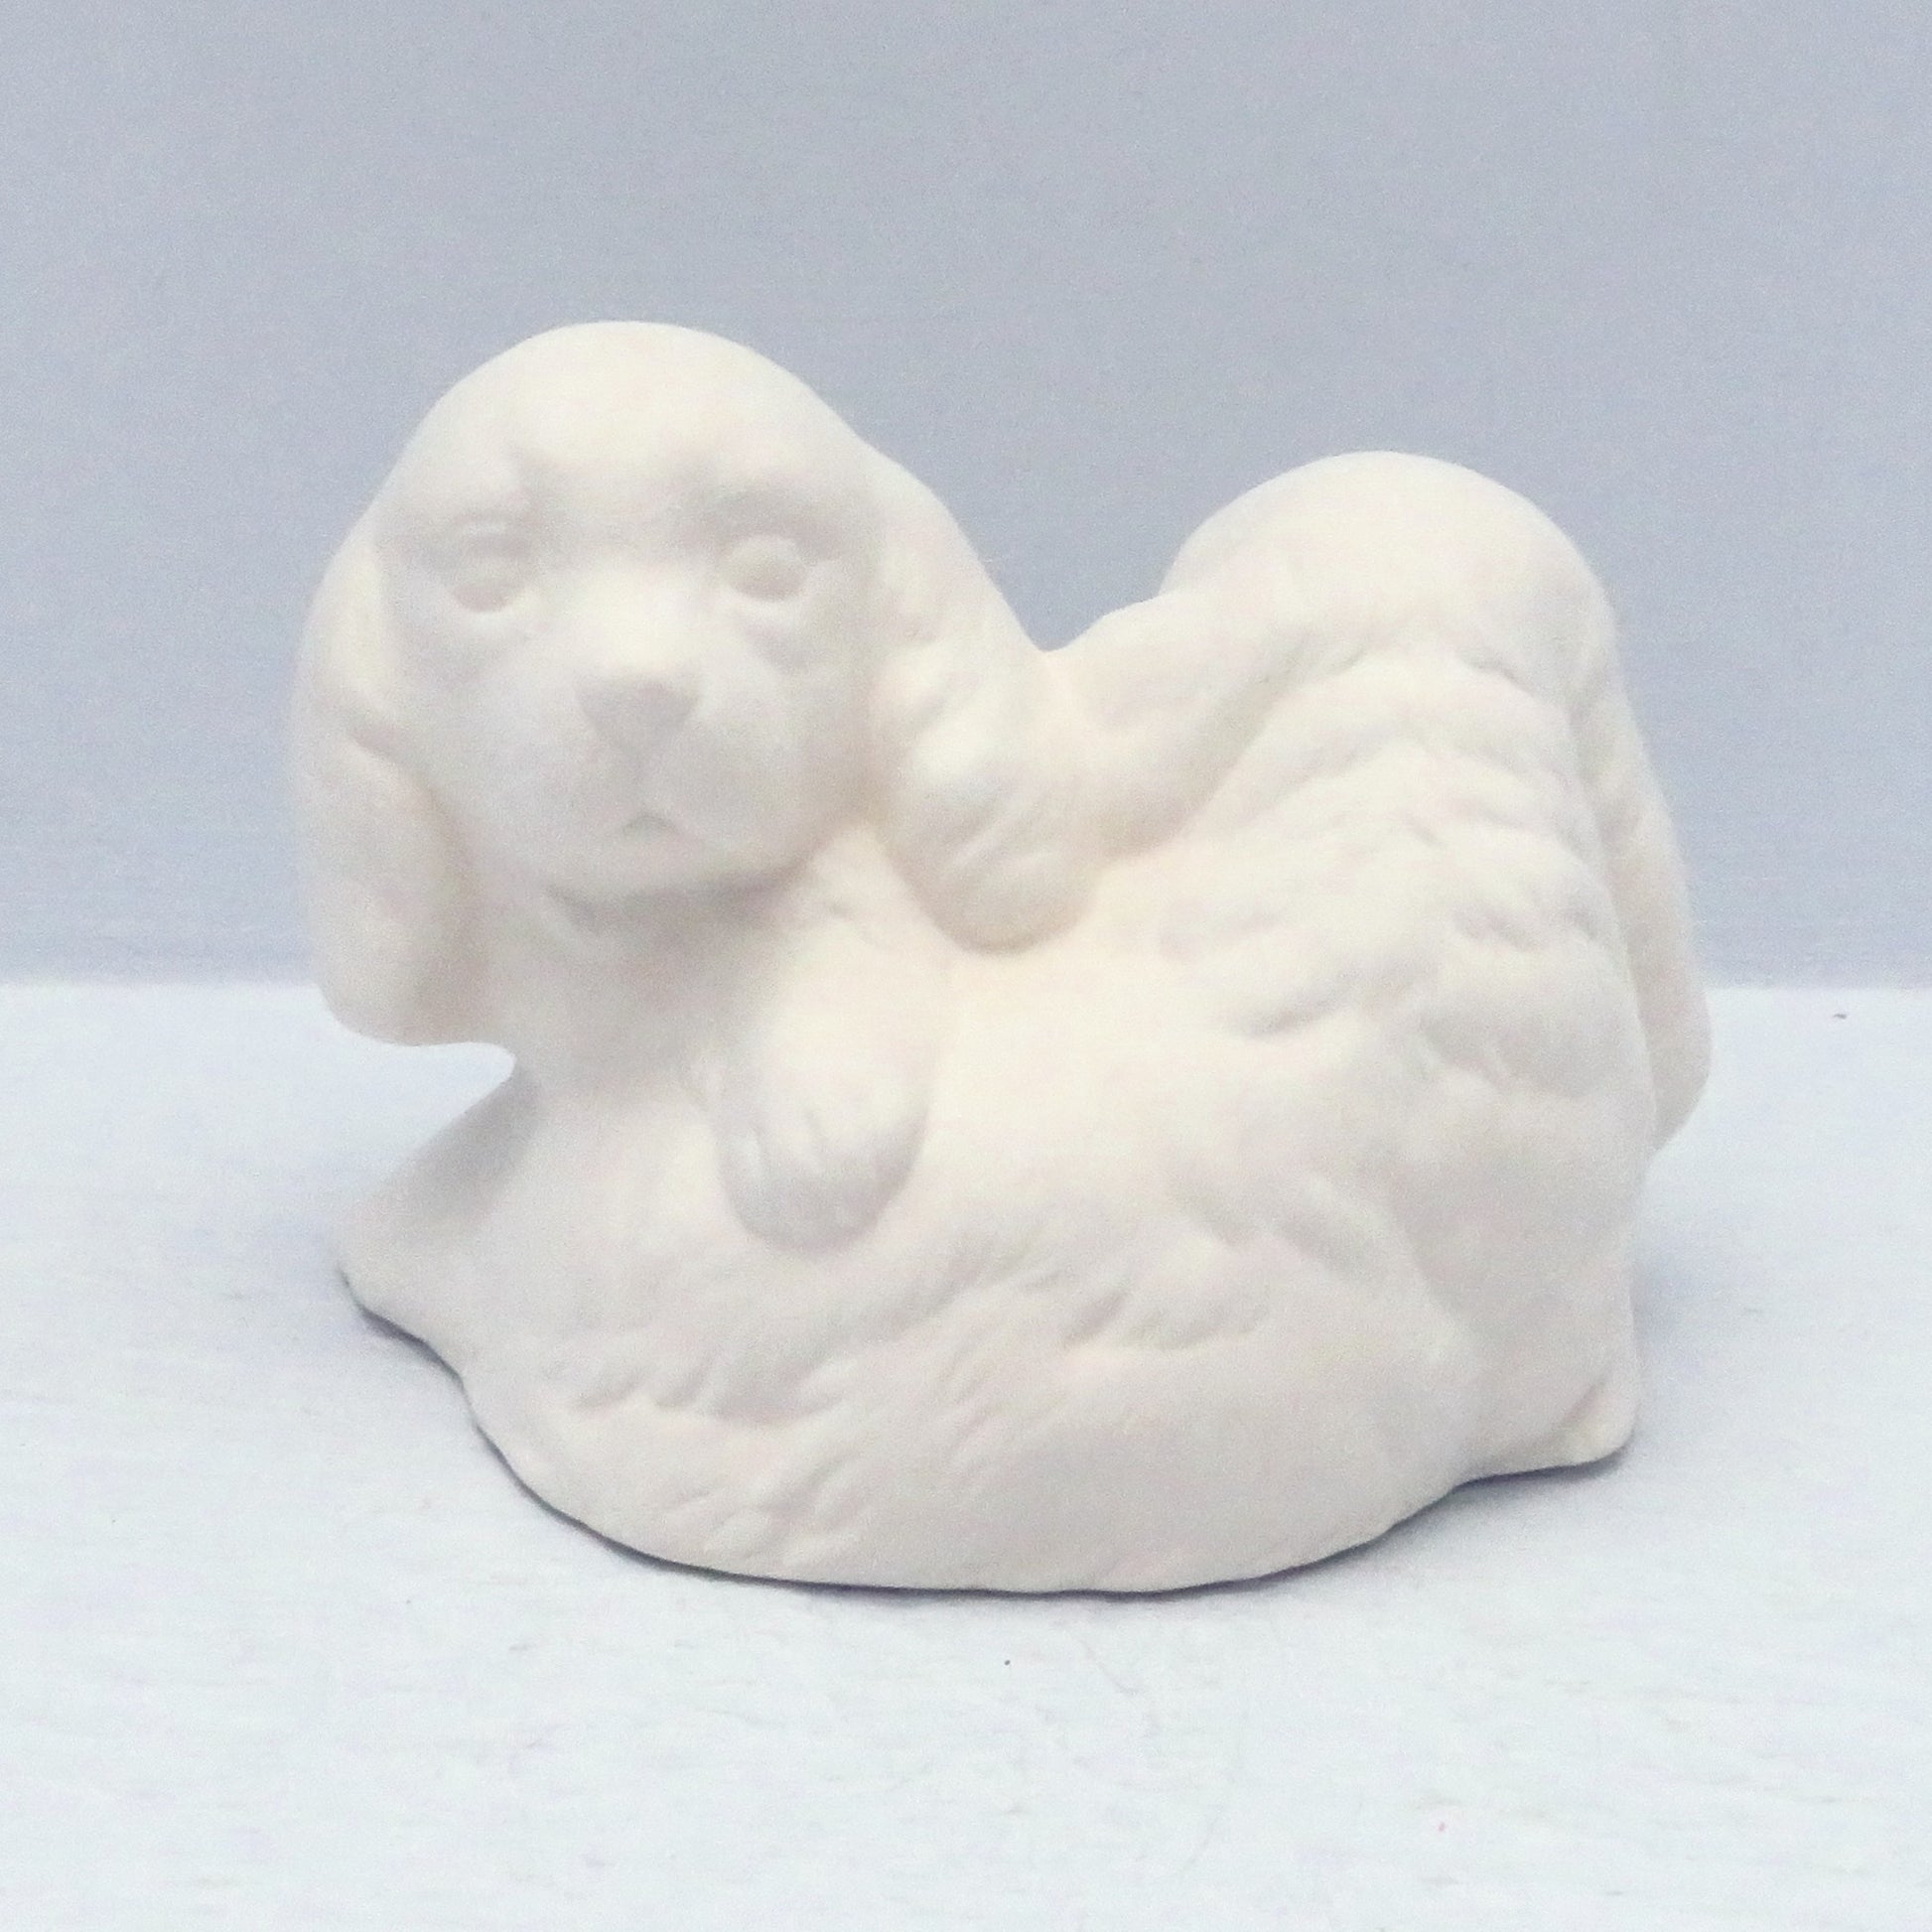 handmade ready to paint figurine with 2 puppies curled over each other.  One is looking forward and one is looking back away from the camera